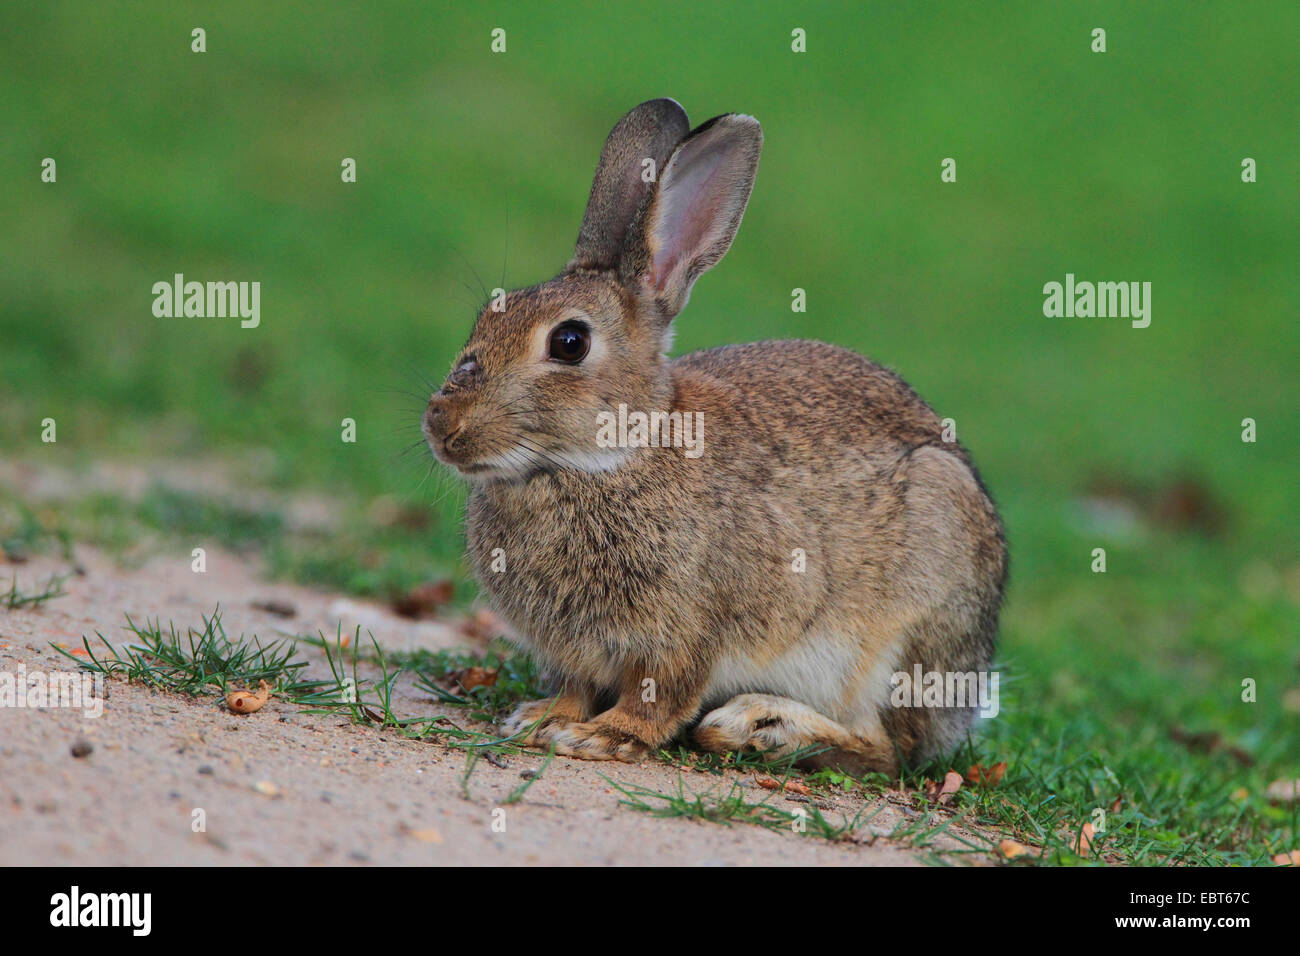 European rabbit (Oryctolagus cuniculus), wild rabbit sitting in a meadow, Germany Stock Photo